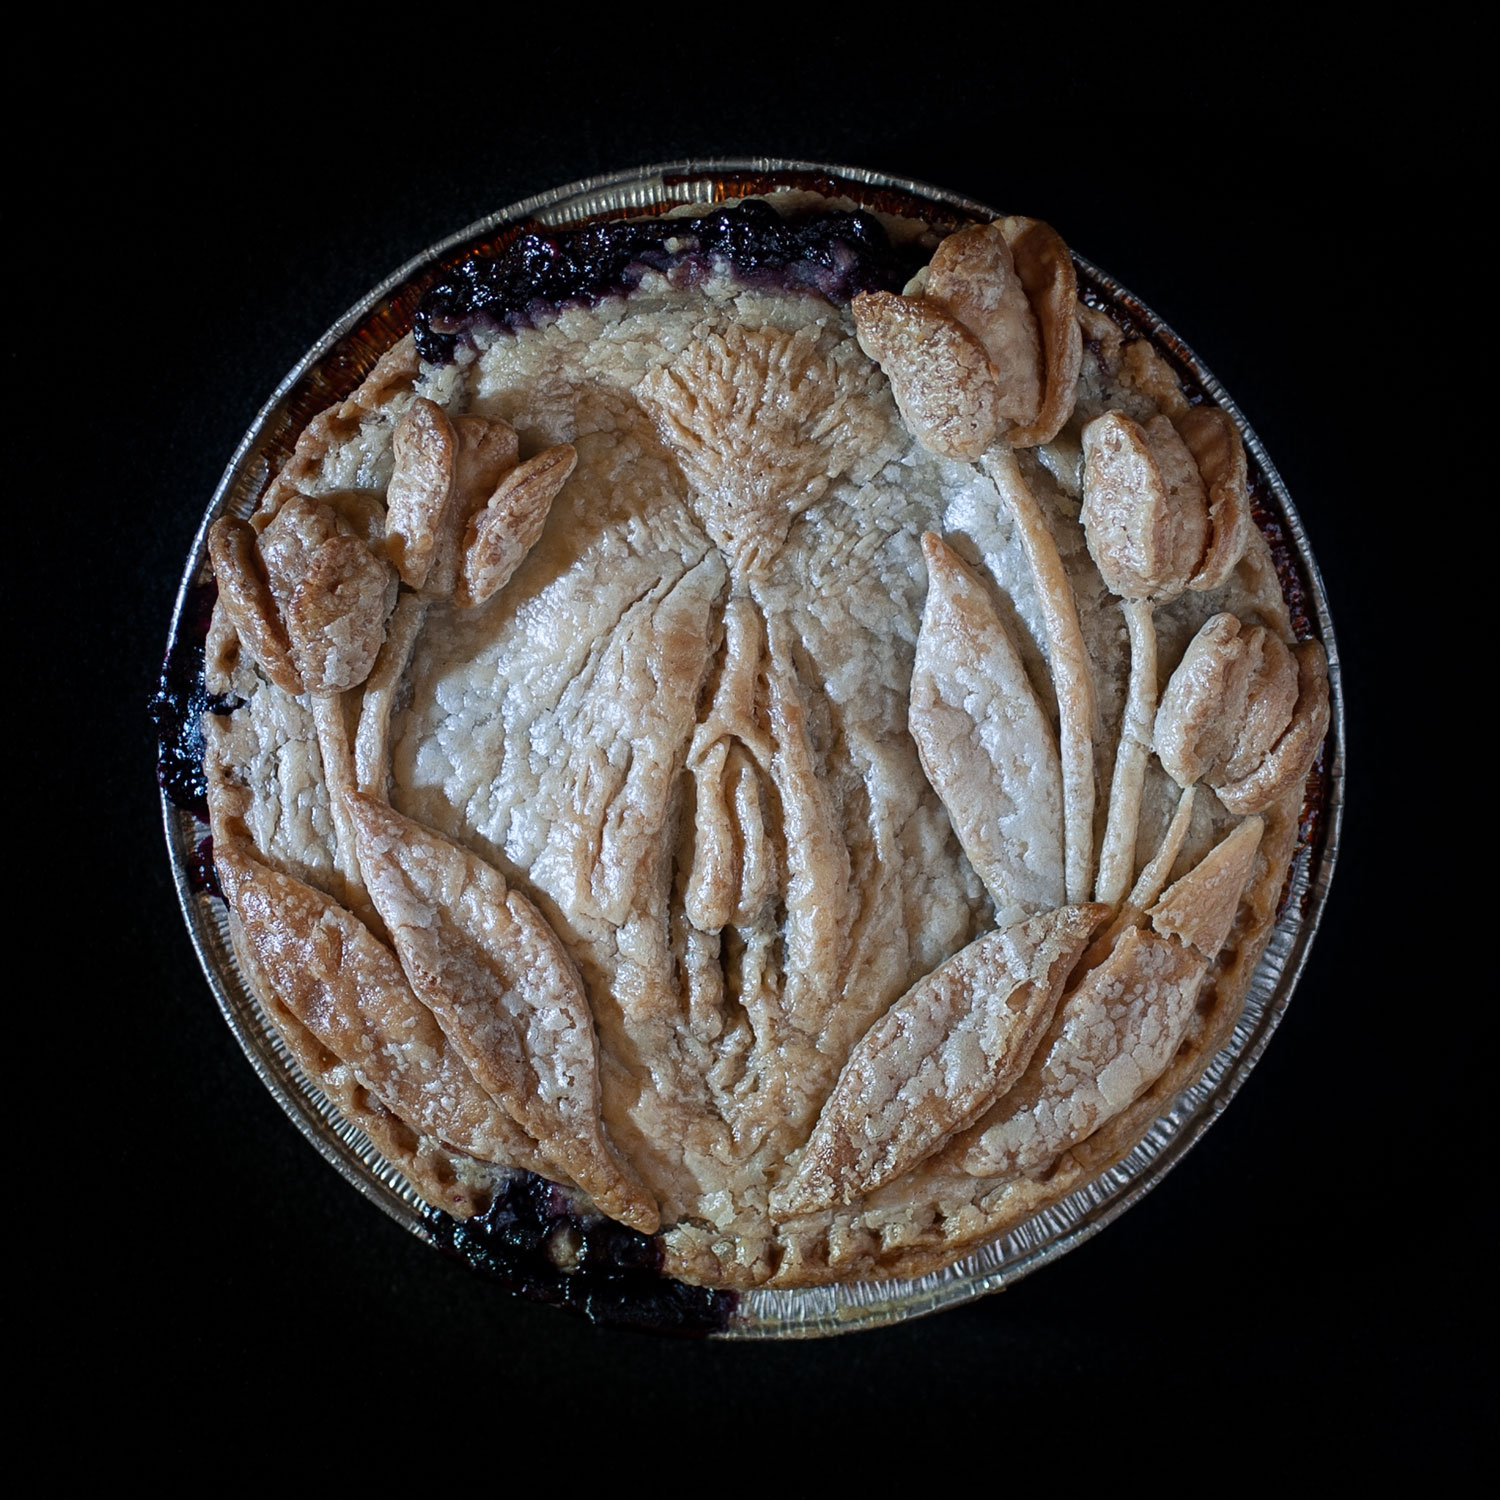 A baked pie on a black background. The hand sculpted pie crust art has a vulva in the center surrounded by a wreath of tulips. The blueberry filling has bubbled out of the top of the pie crust.